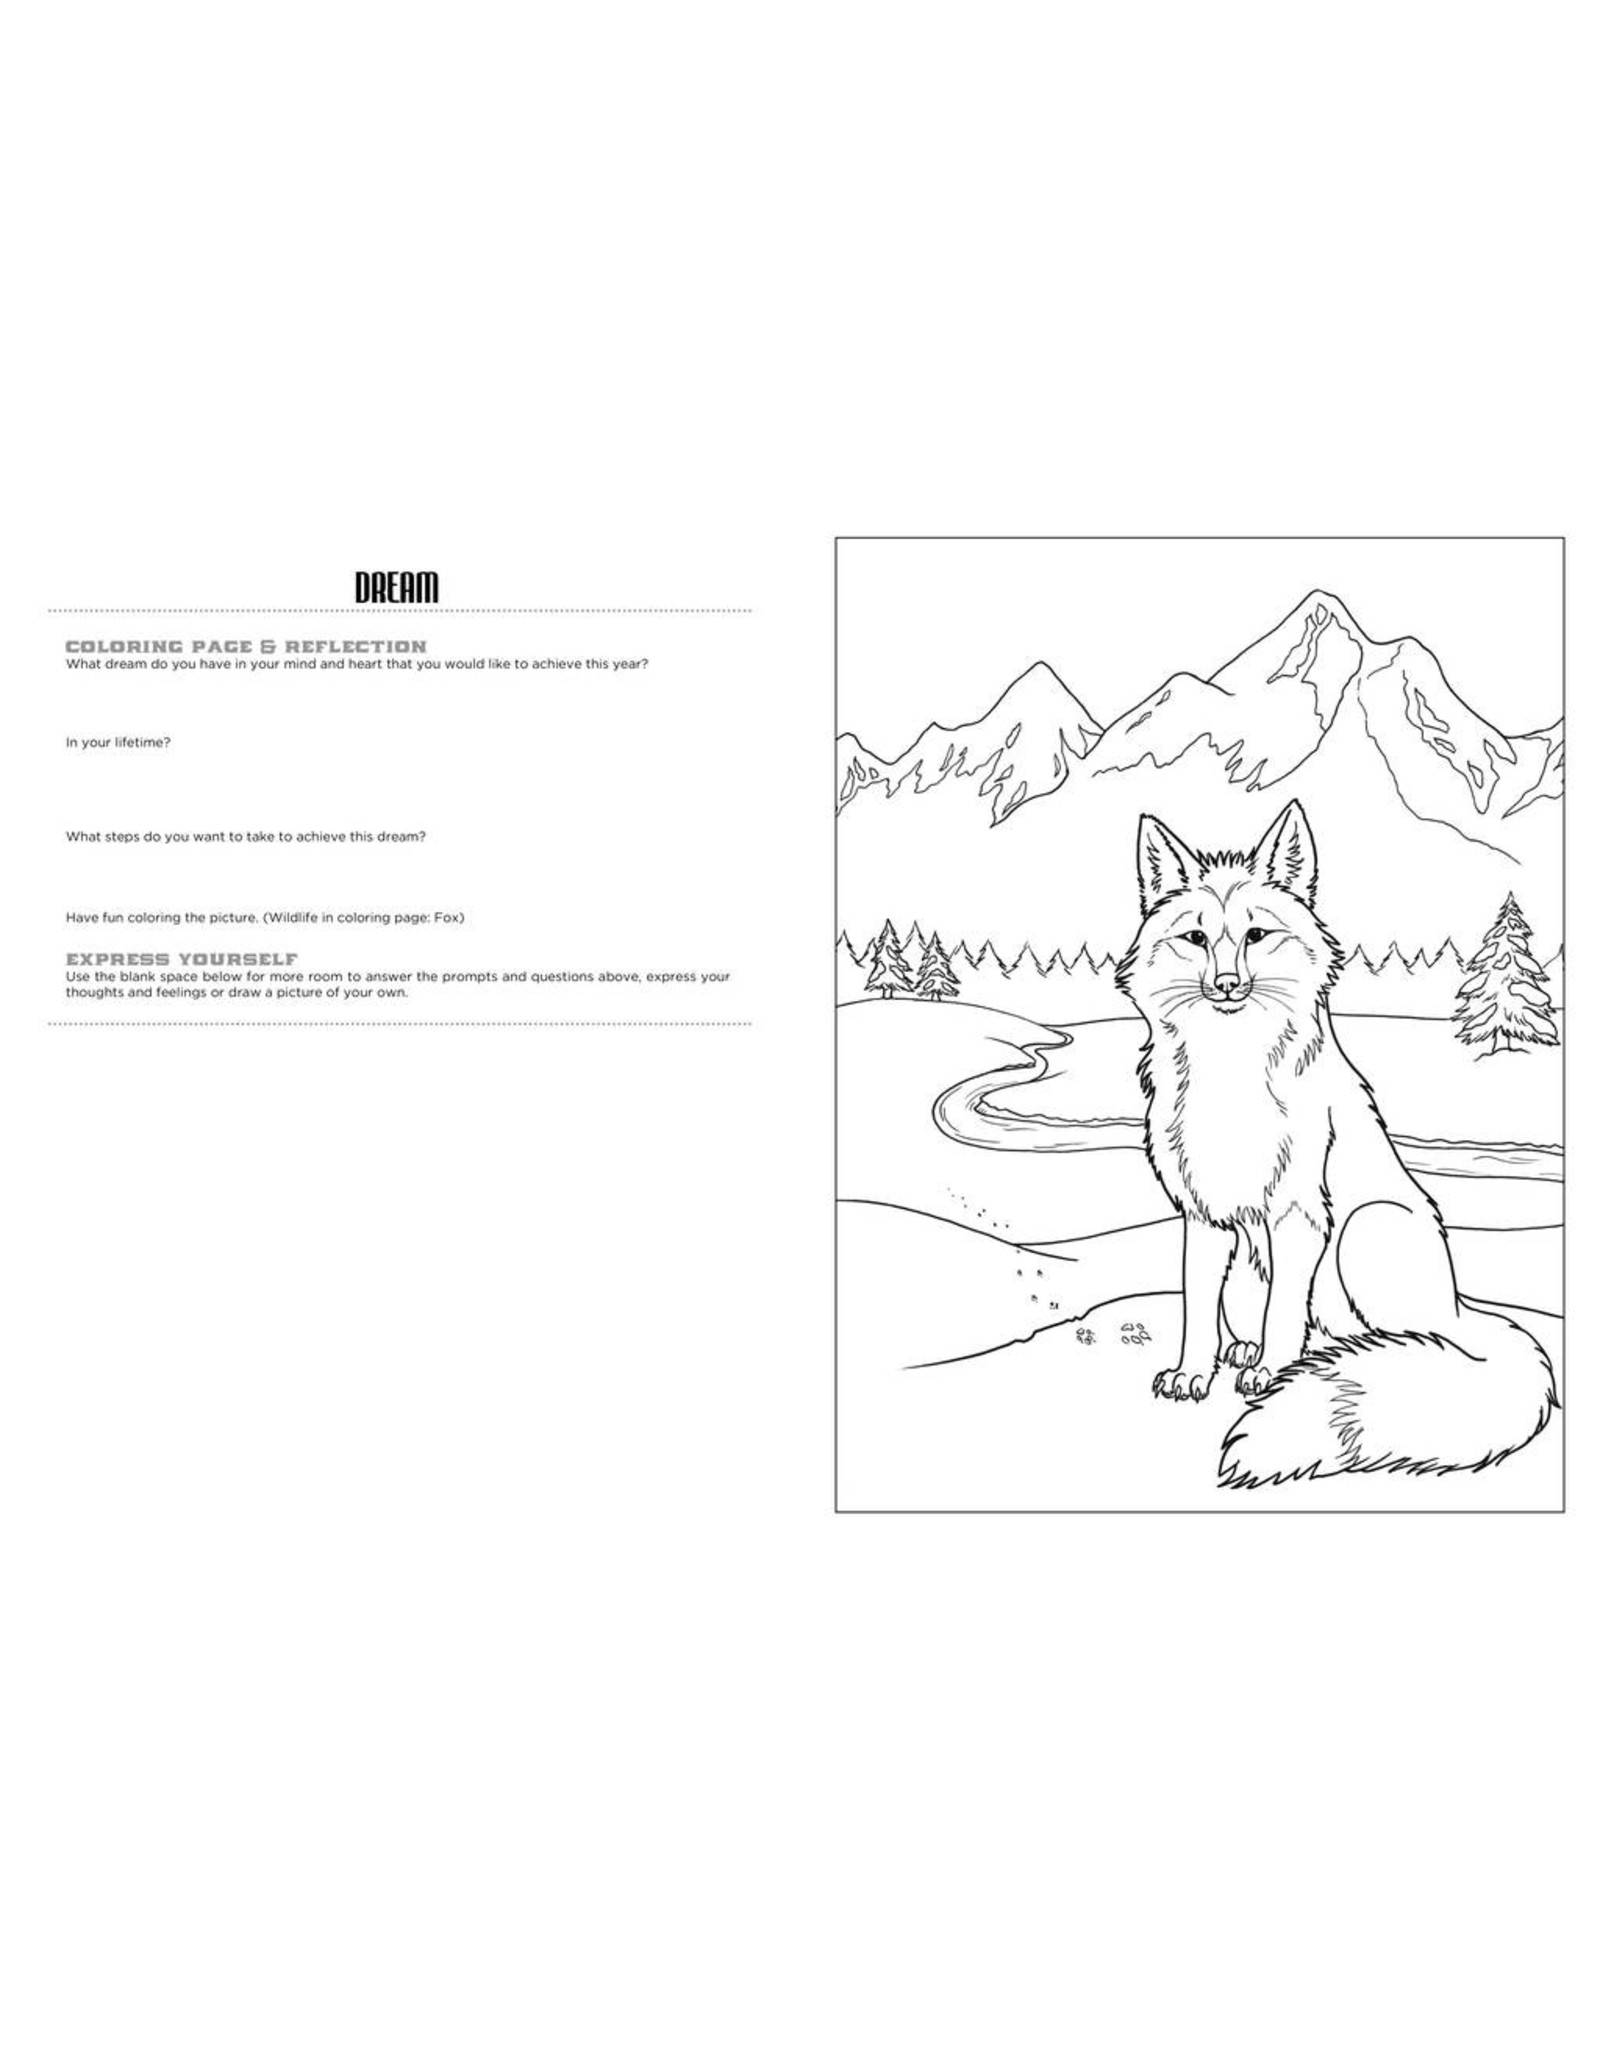 Discover at the River Expressive Art Coloring Activity Book